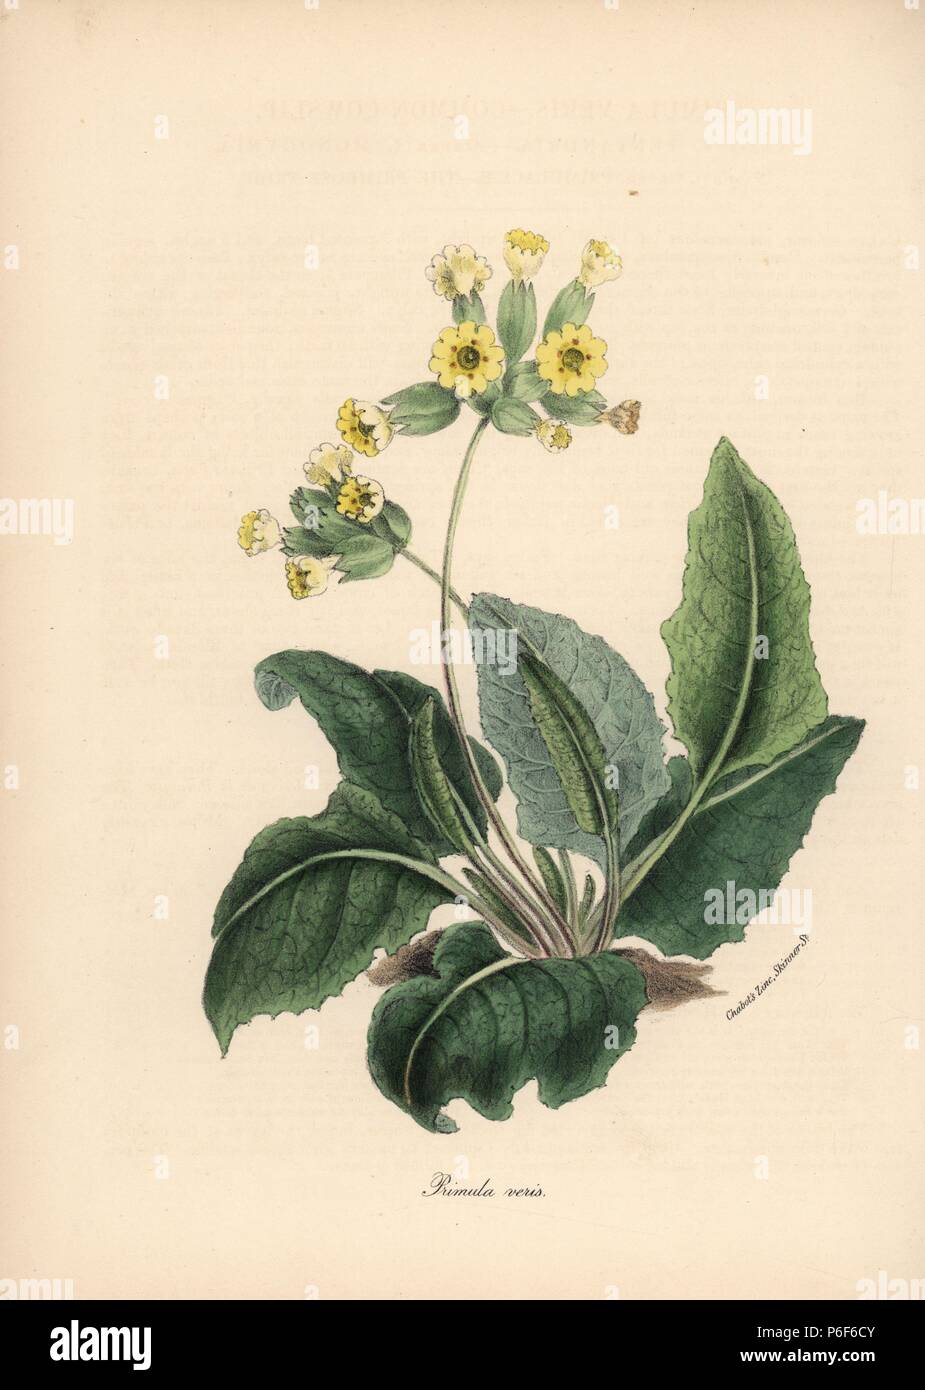 Common cowslip, Primula veris. Handcoloured zincograph by C. Chabot drawn by Miss M. A. Burnett from her 'Plantae Utiliores: or Illustrations of Useful Plants,' Whittaker, London, 1842. Miss Burnett drew the botanical illustrations, but the text was chiefly by her late brother, British botanist Gilbert Thomas Burnett (1800-1835). Stock Photo